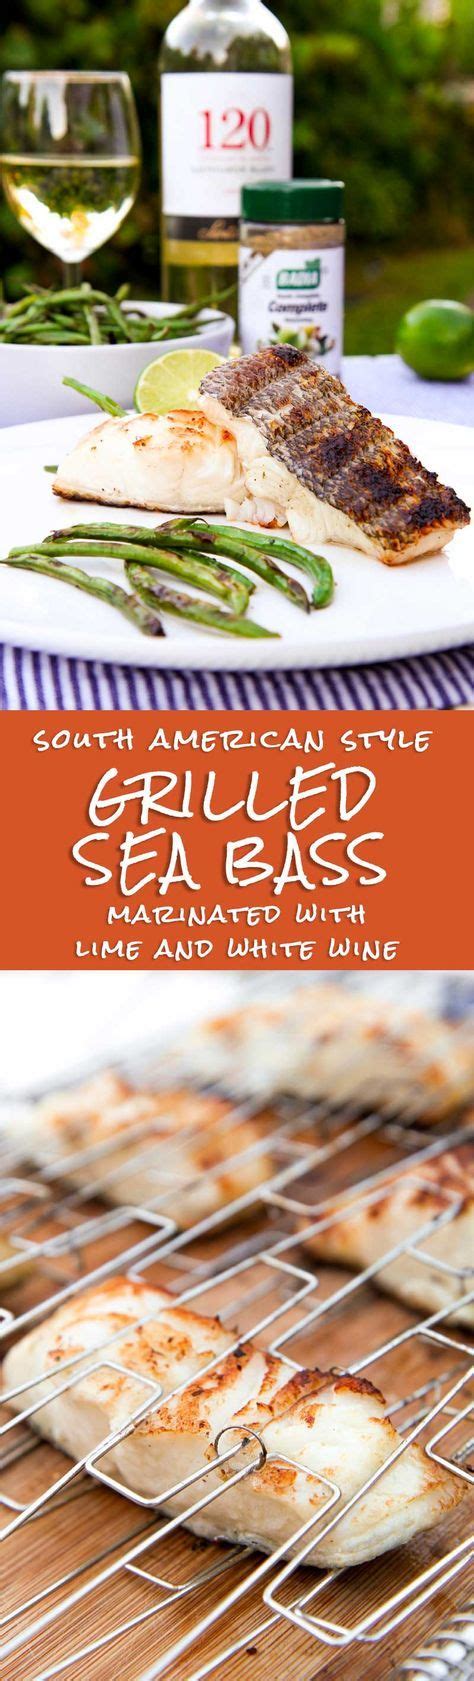 Grilled Sea Bass Marinated With White Wine And Herbs This Grilled Sea Bass Recipe Perfectly